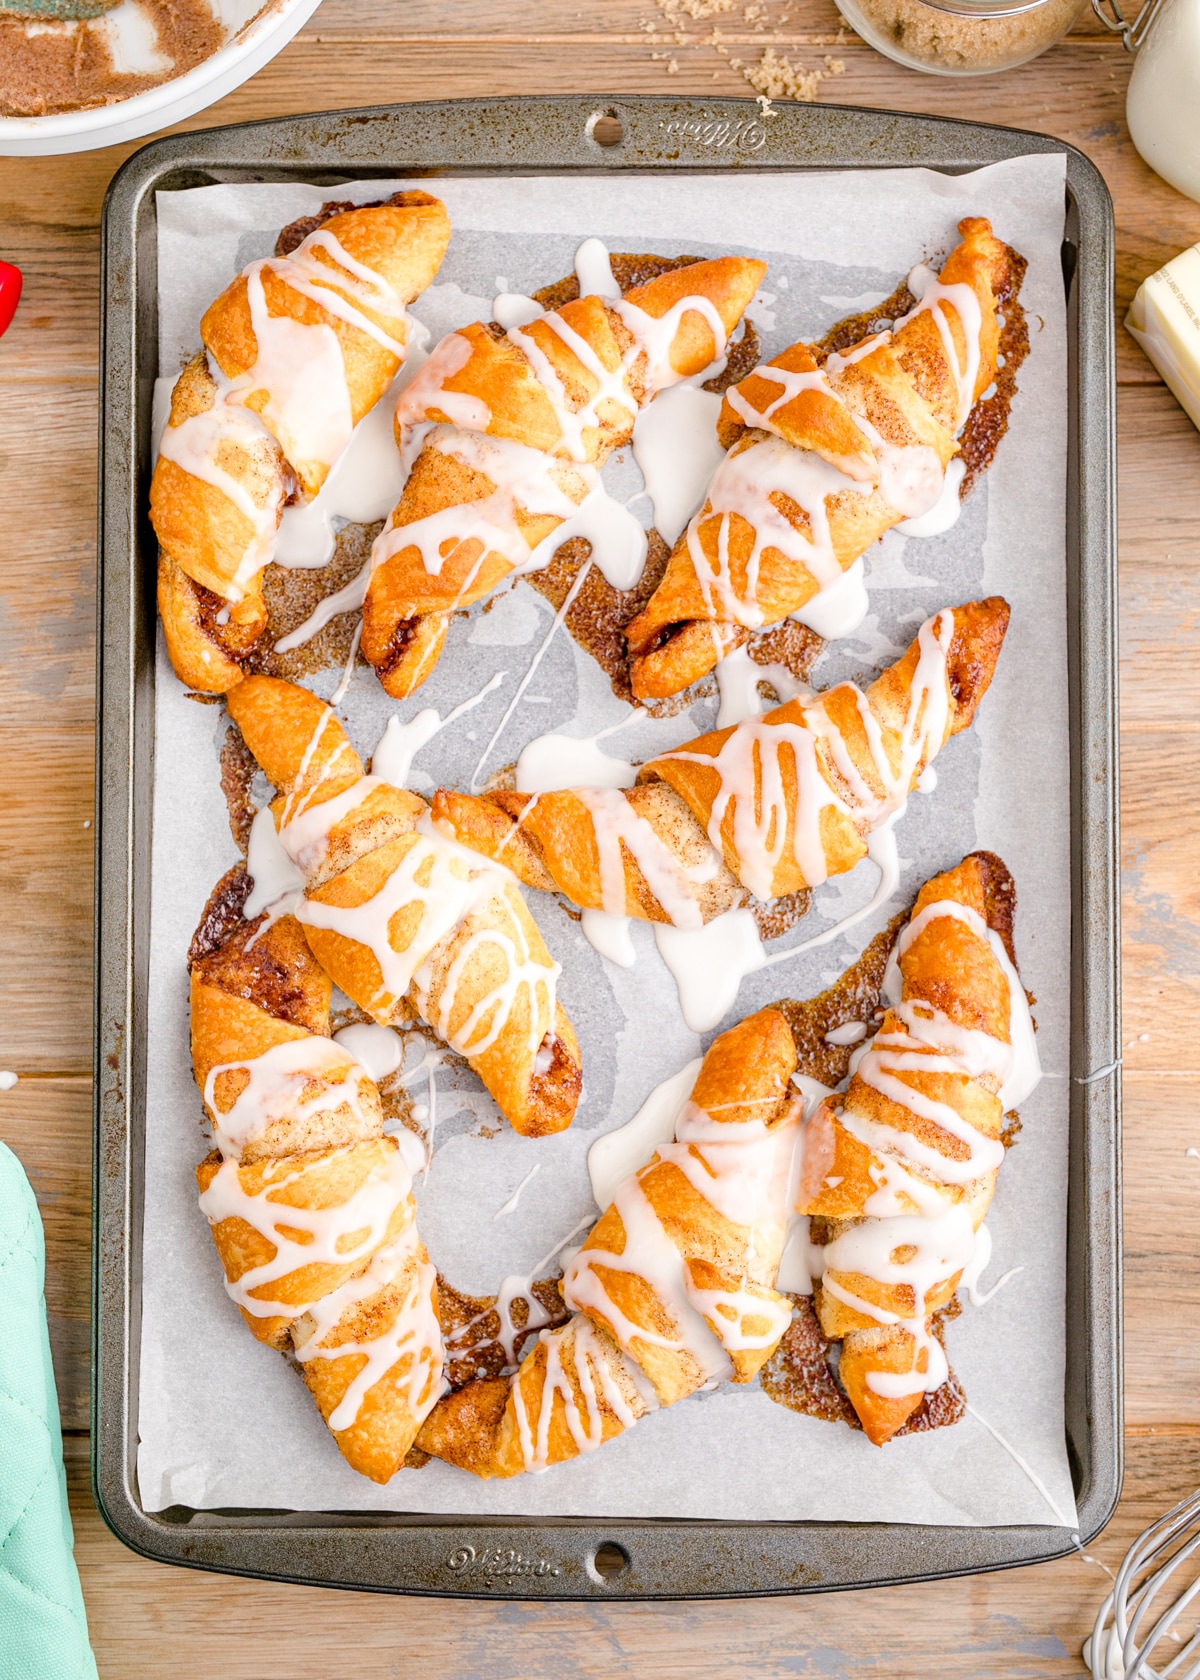 Baked cinnamon crescent rolls drizzled with a powdered sugar icing on a baking sheet.